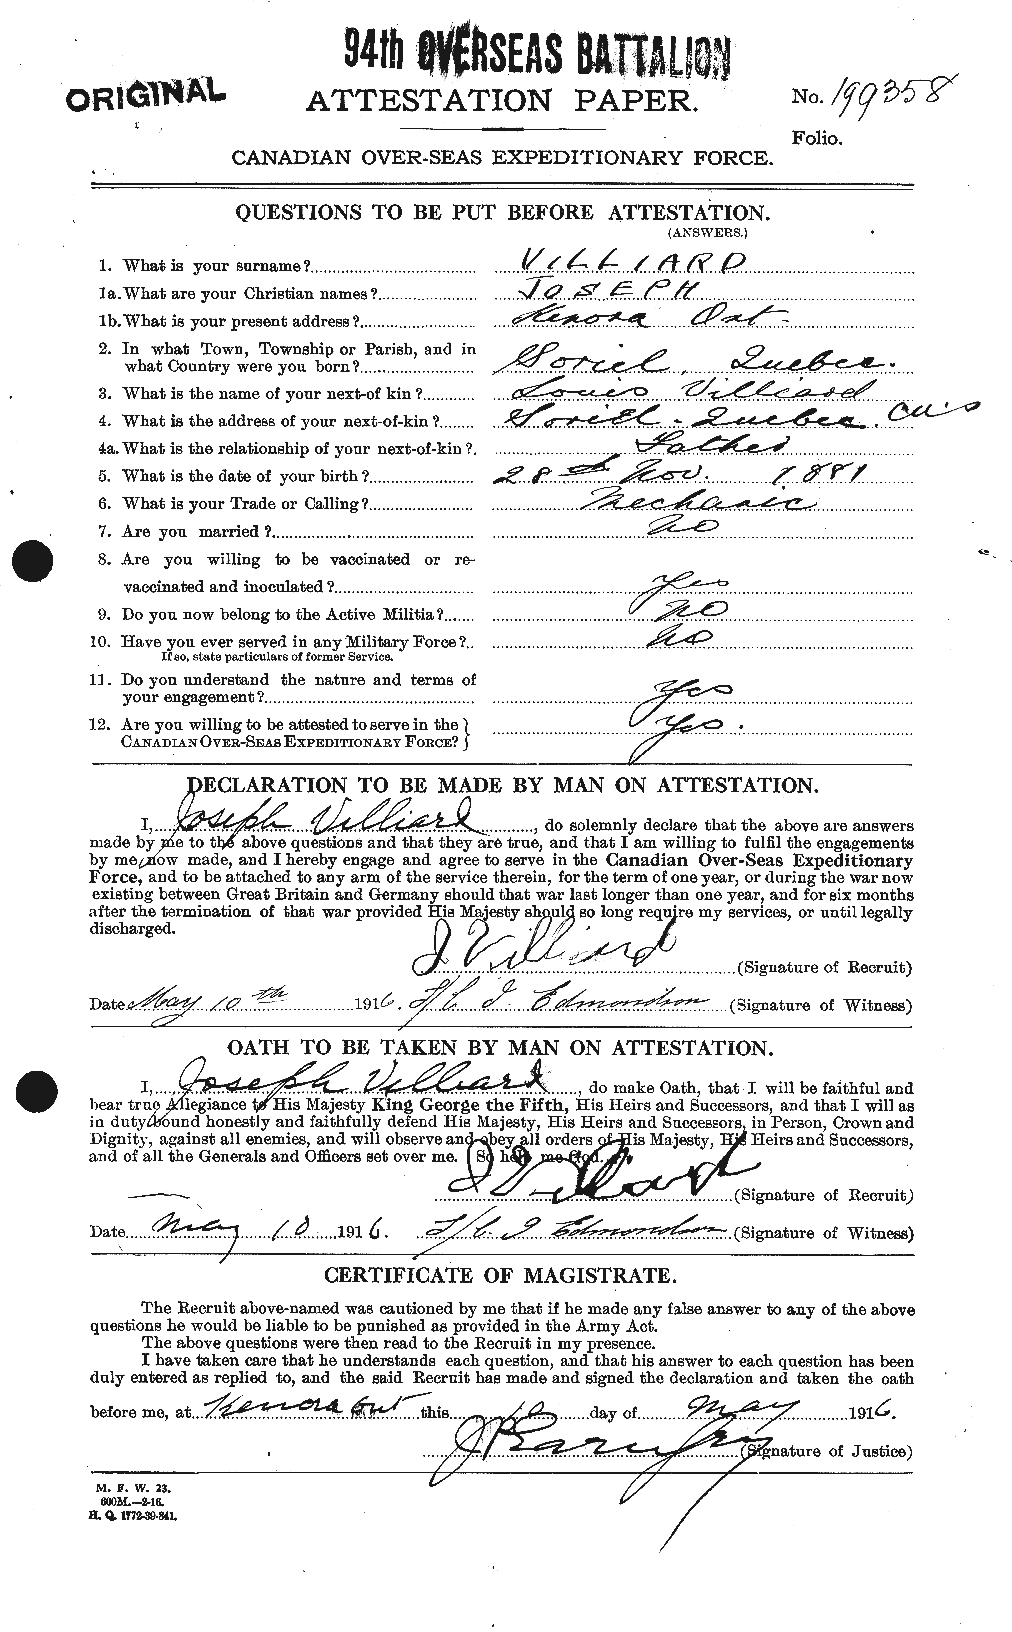 Personnel Records of the First World War - CEF 653899a